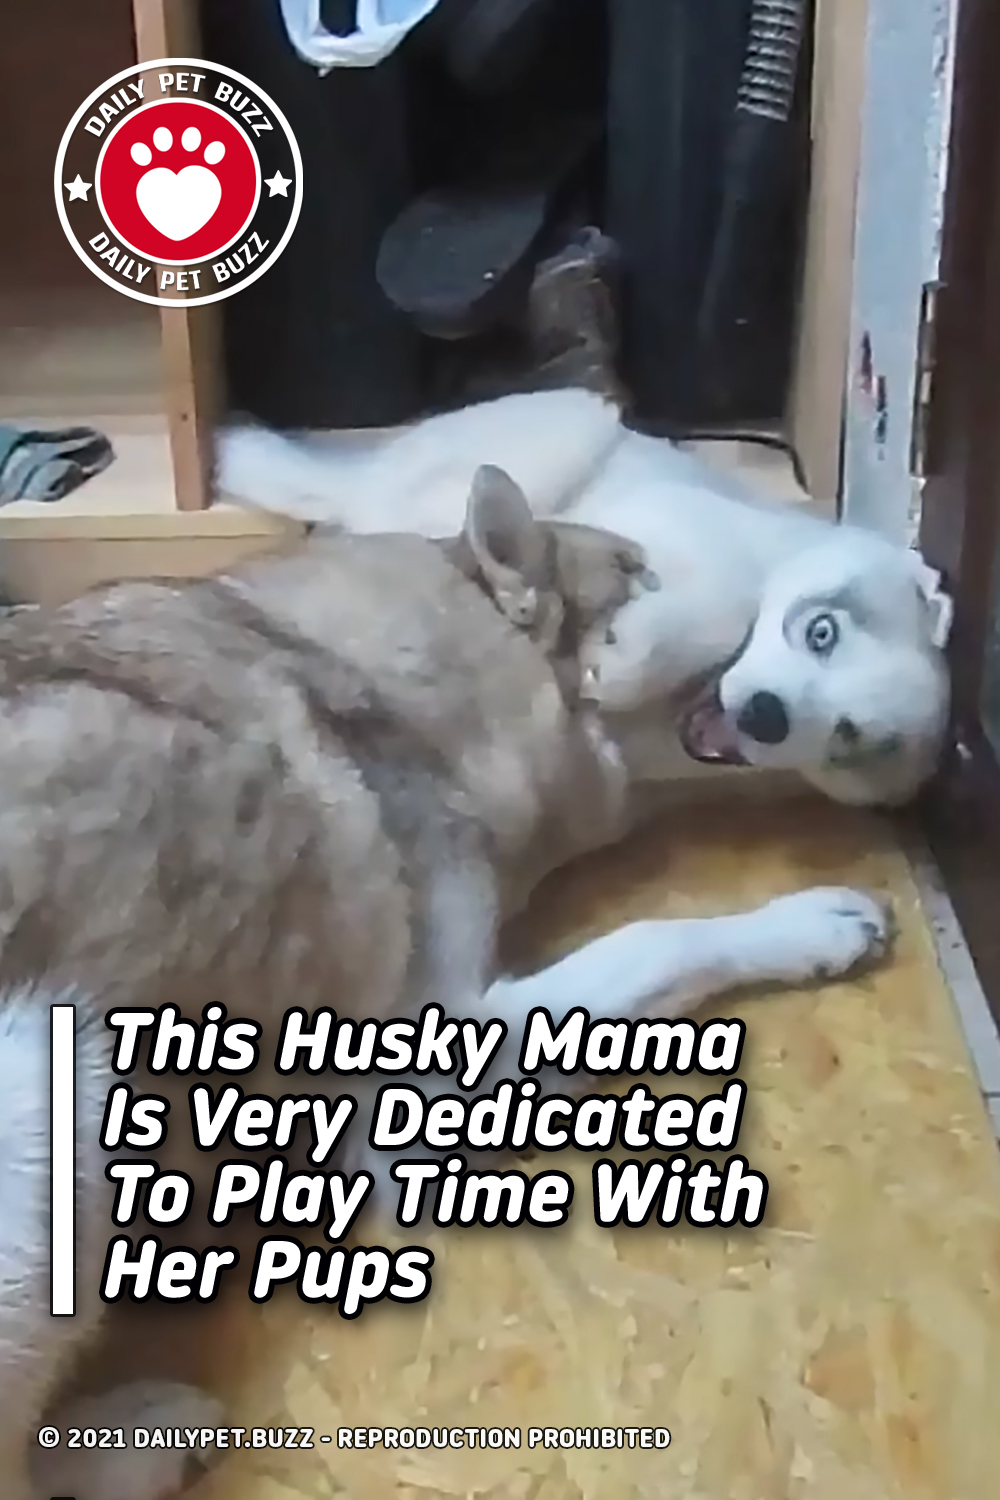 This Husky Mama Is Very Dedicated To Play Time With Her Pups